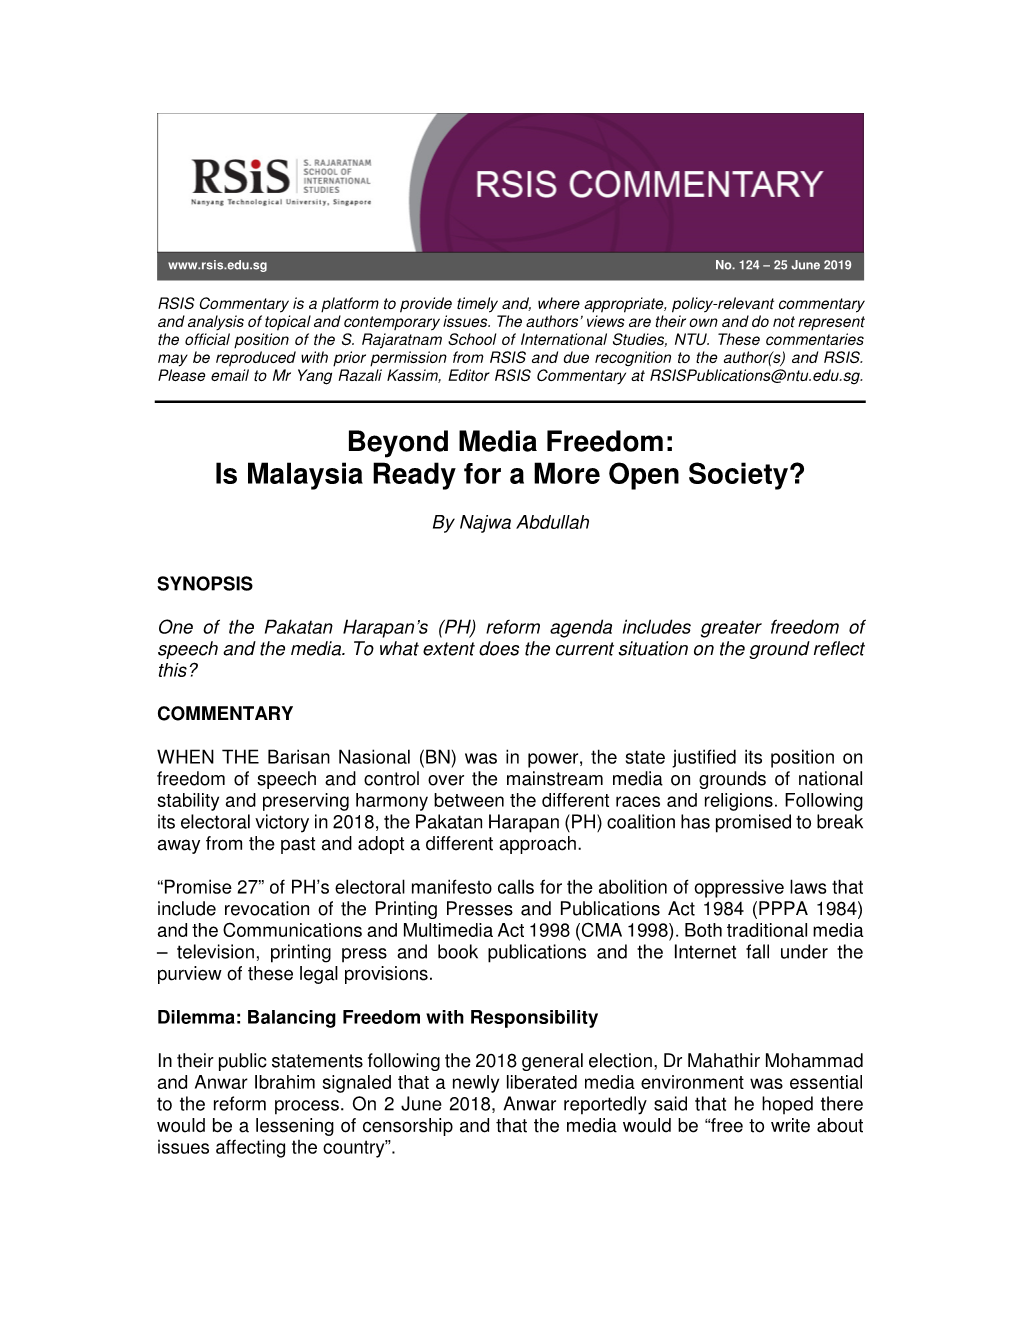 Beyond Media Freedom: Is Malaysia Ready for a More Open Society?